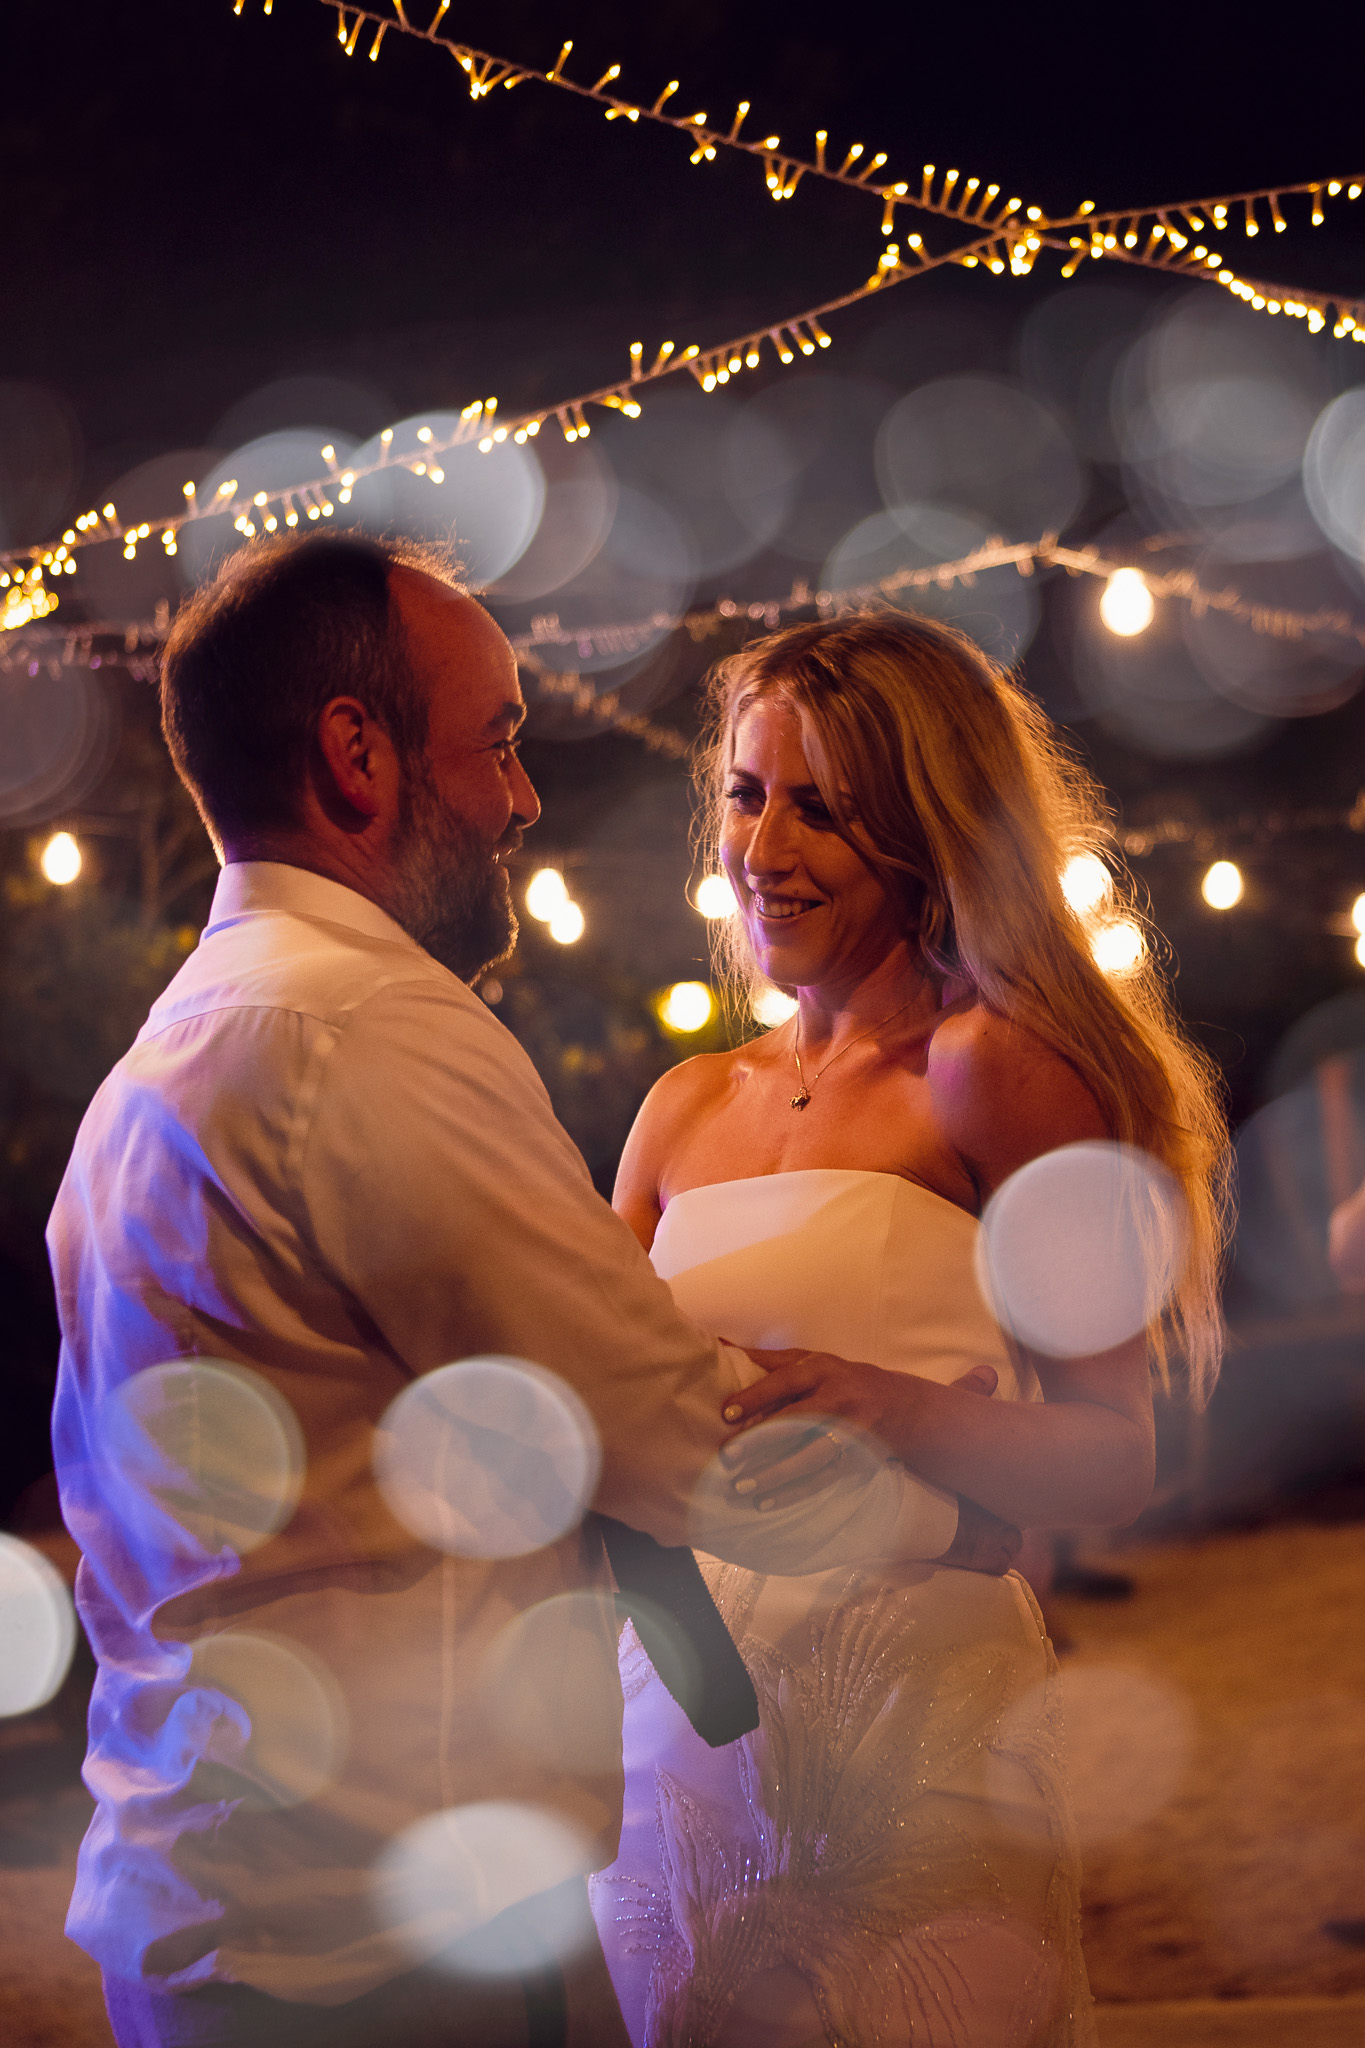 Bride and groom share their first dance under a canopy of fairy lights at their destination wedding